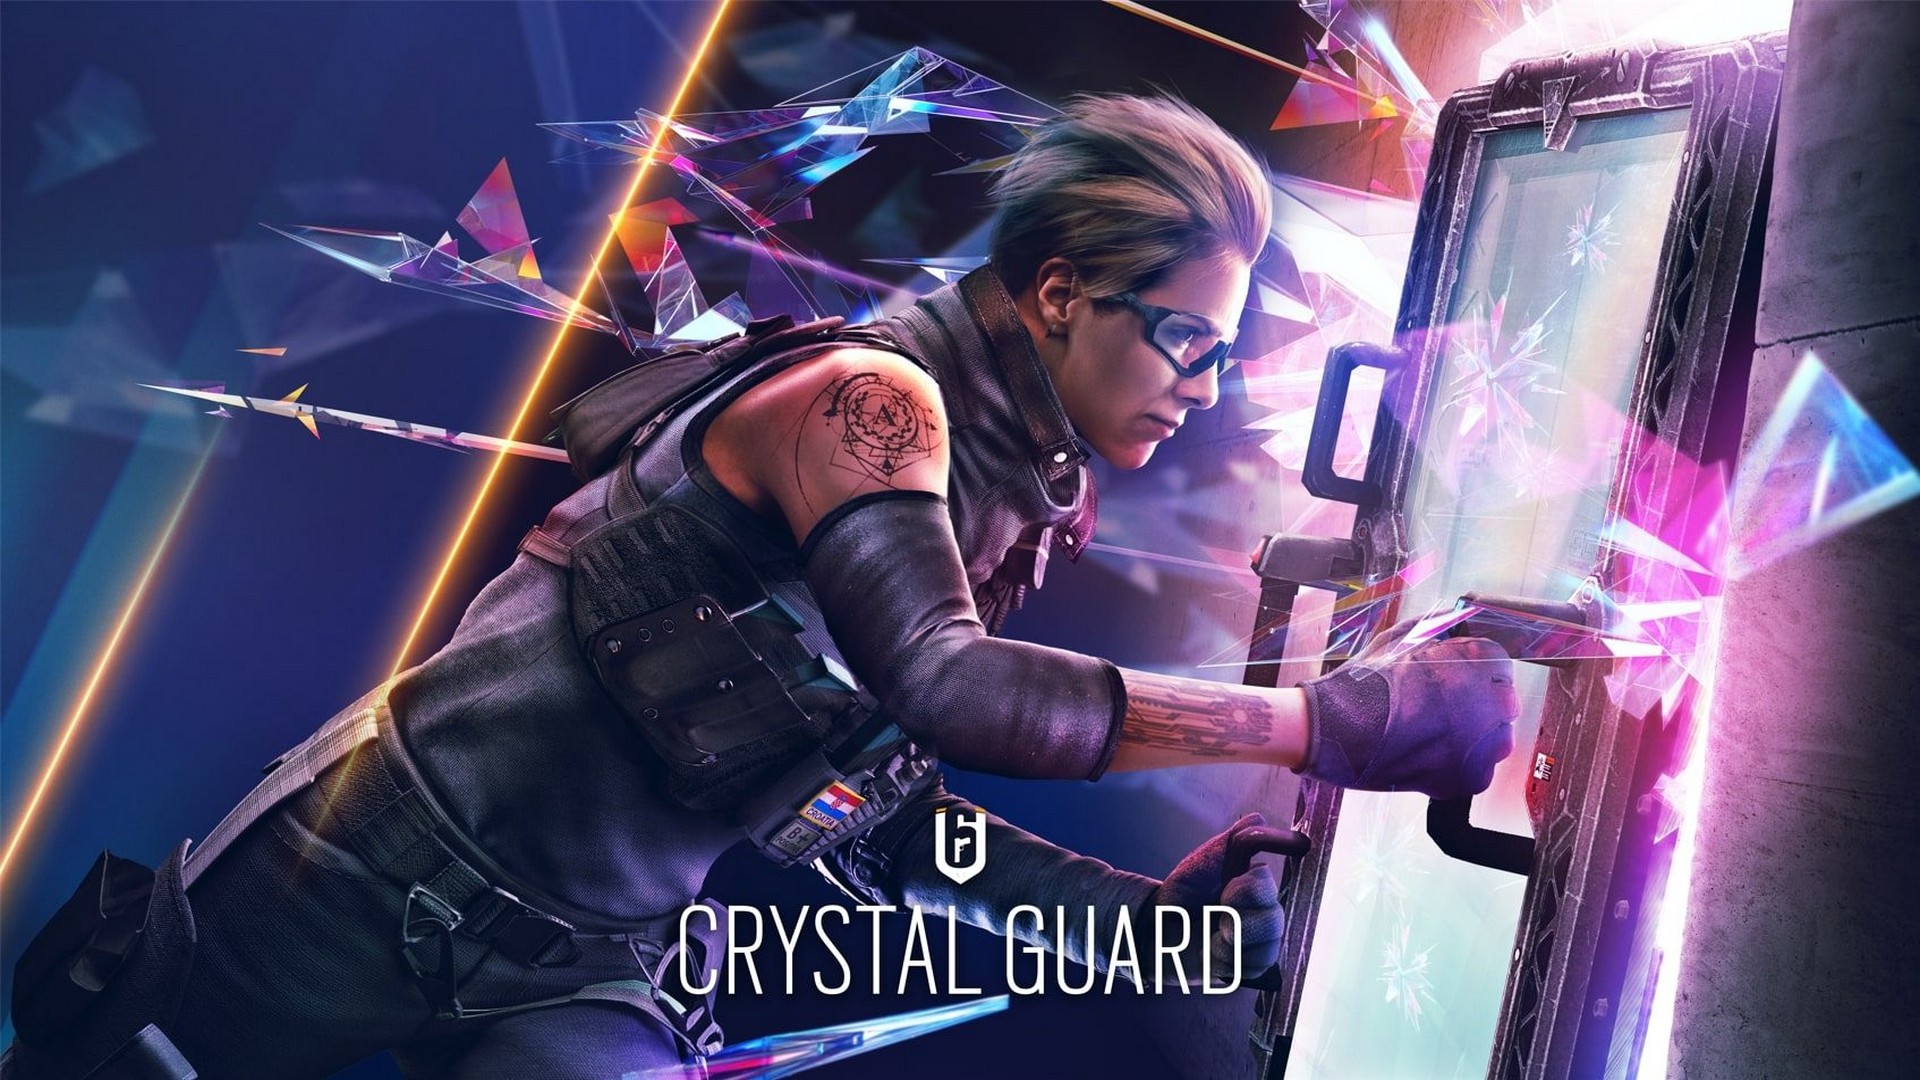 Crystal Guard Launches Today in Tom Clancy’s Rainbow Six Siege